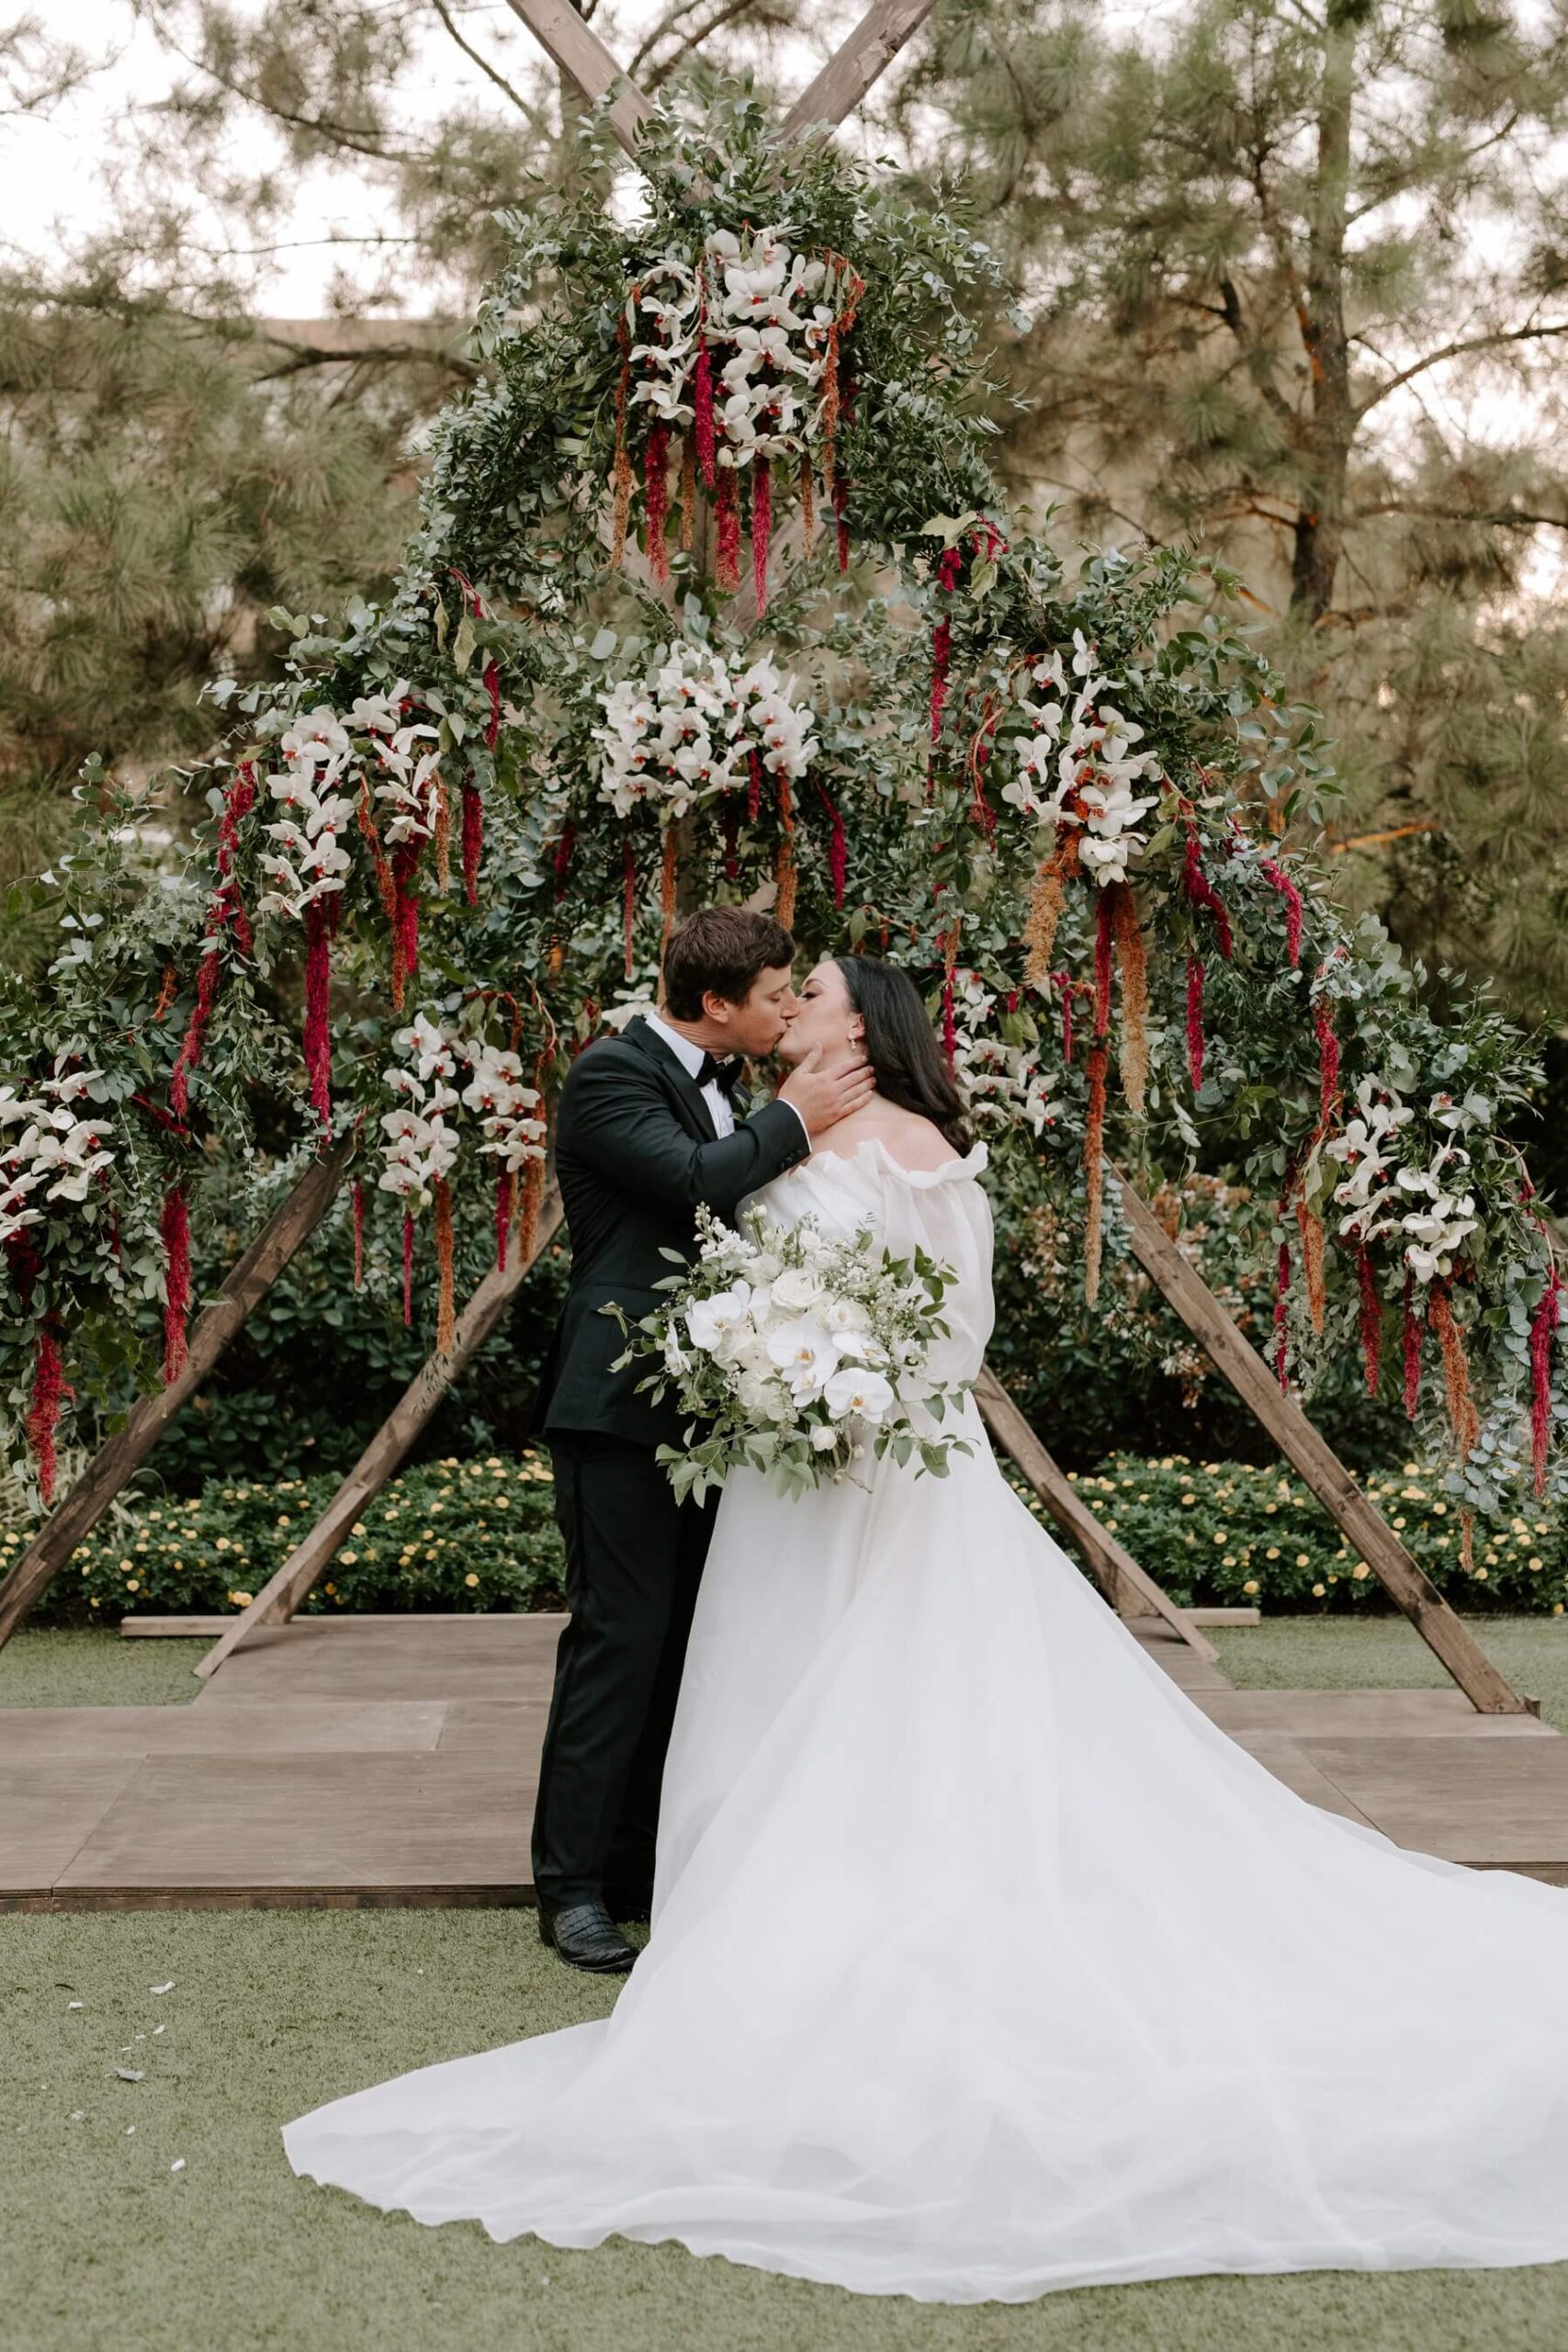 Bride and groom kissing under custom wedding arch adorned with hanging flowers